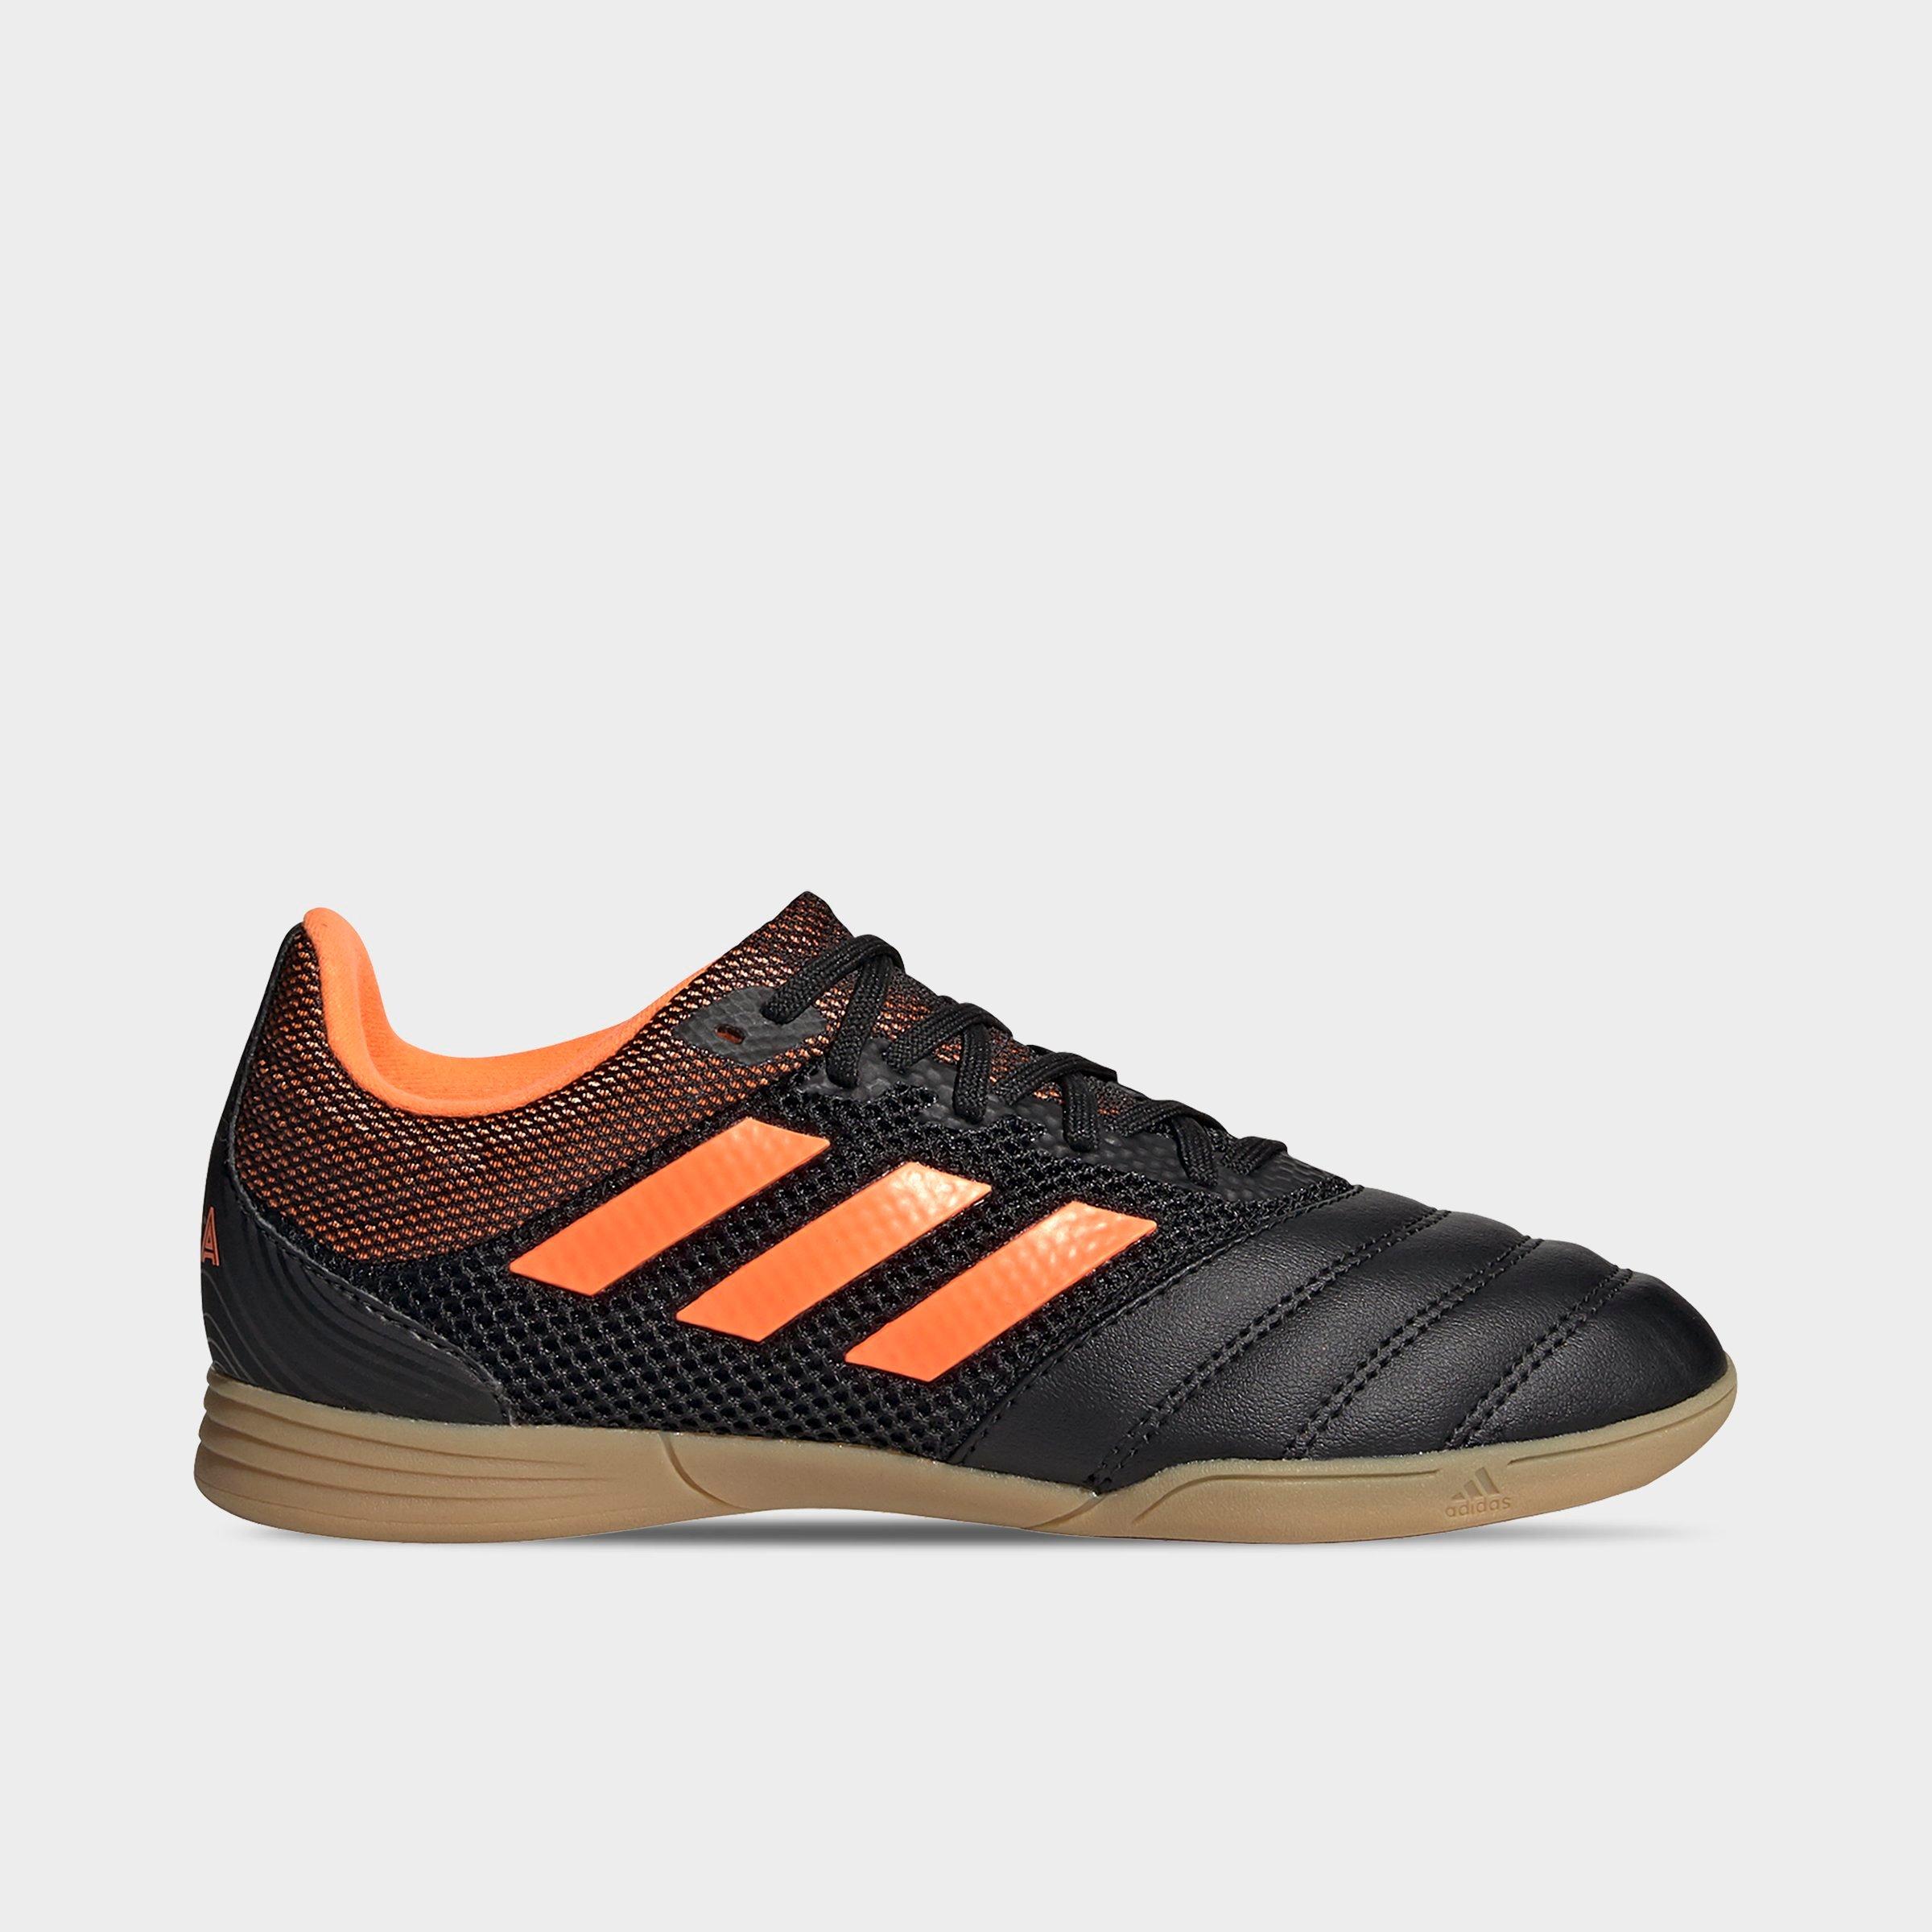 jd sports indoor soccer shoes